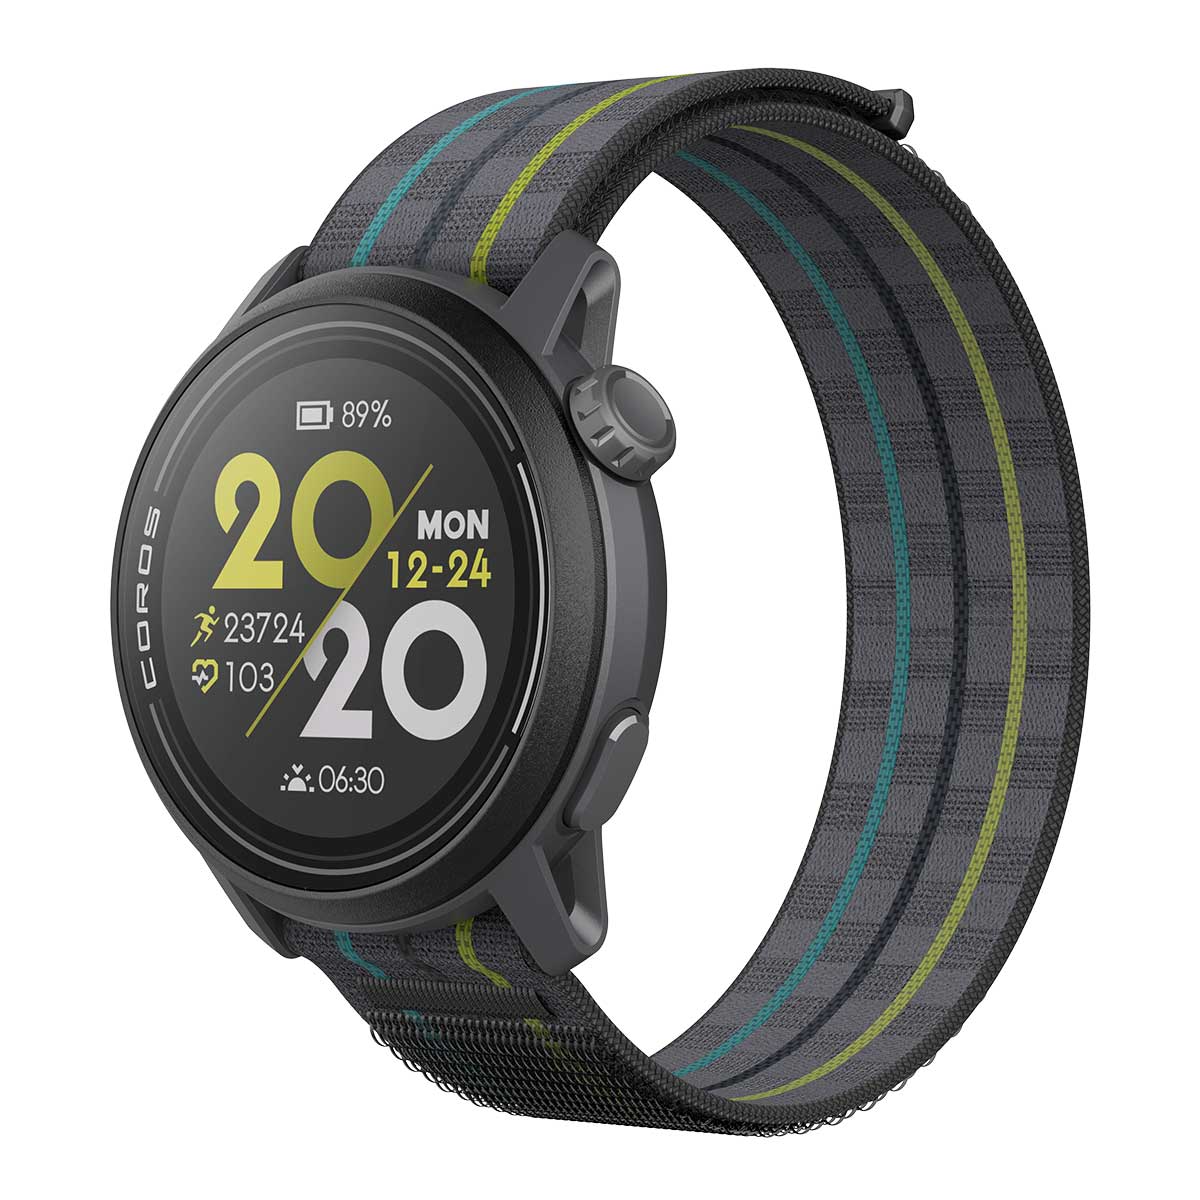 Garmin Forerunner 255 vs. COROS PACE 2: Which Should You Pick?